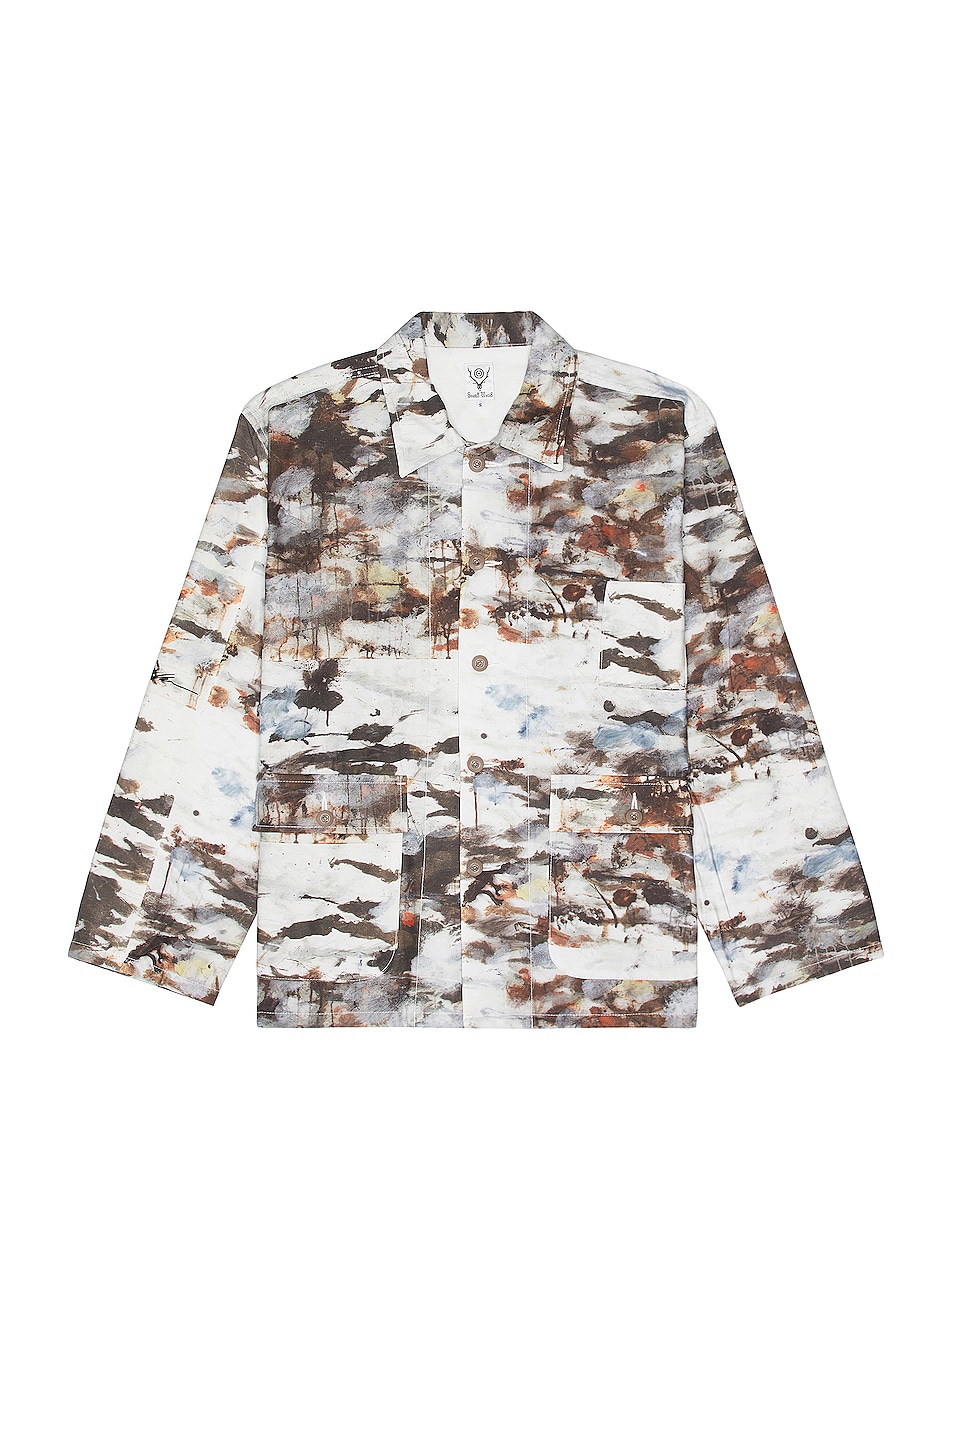 Image 1 of South2 West8 x Ben Miller Hunting Shirt in Taylor River Off White